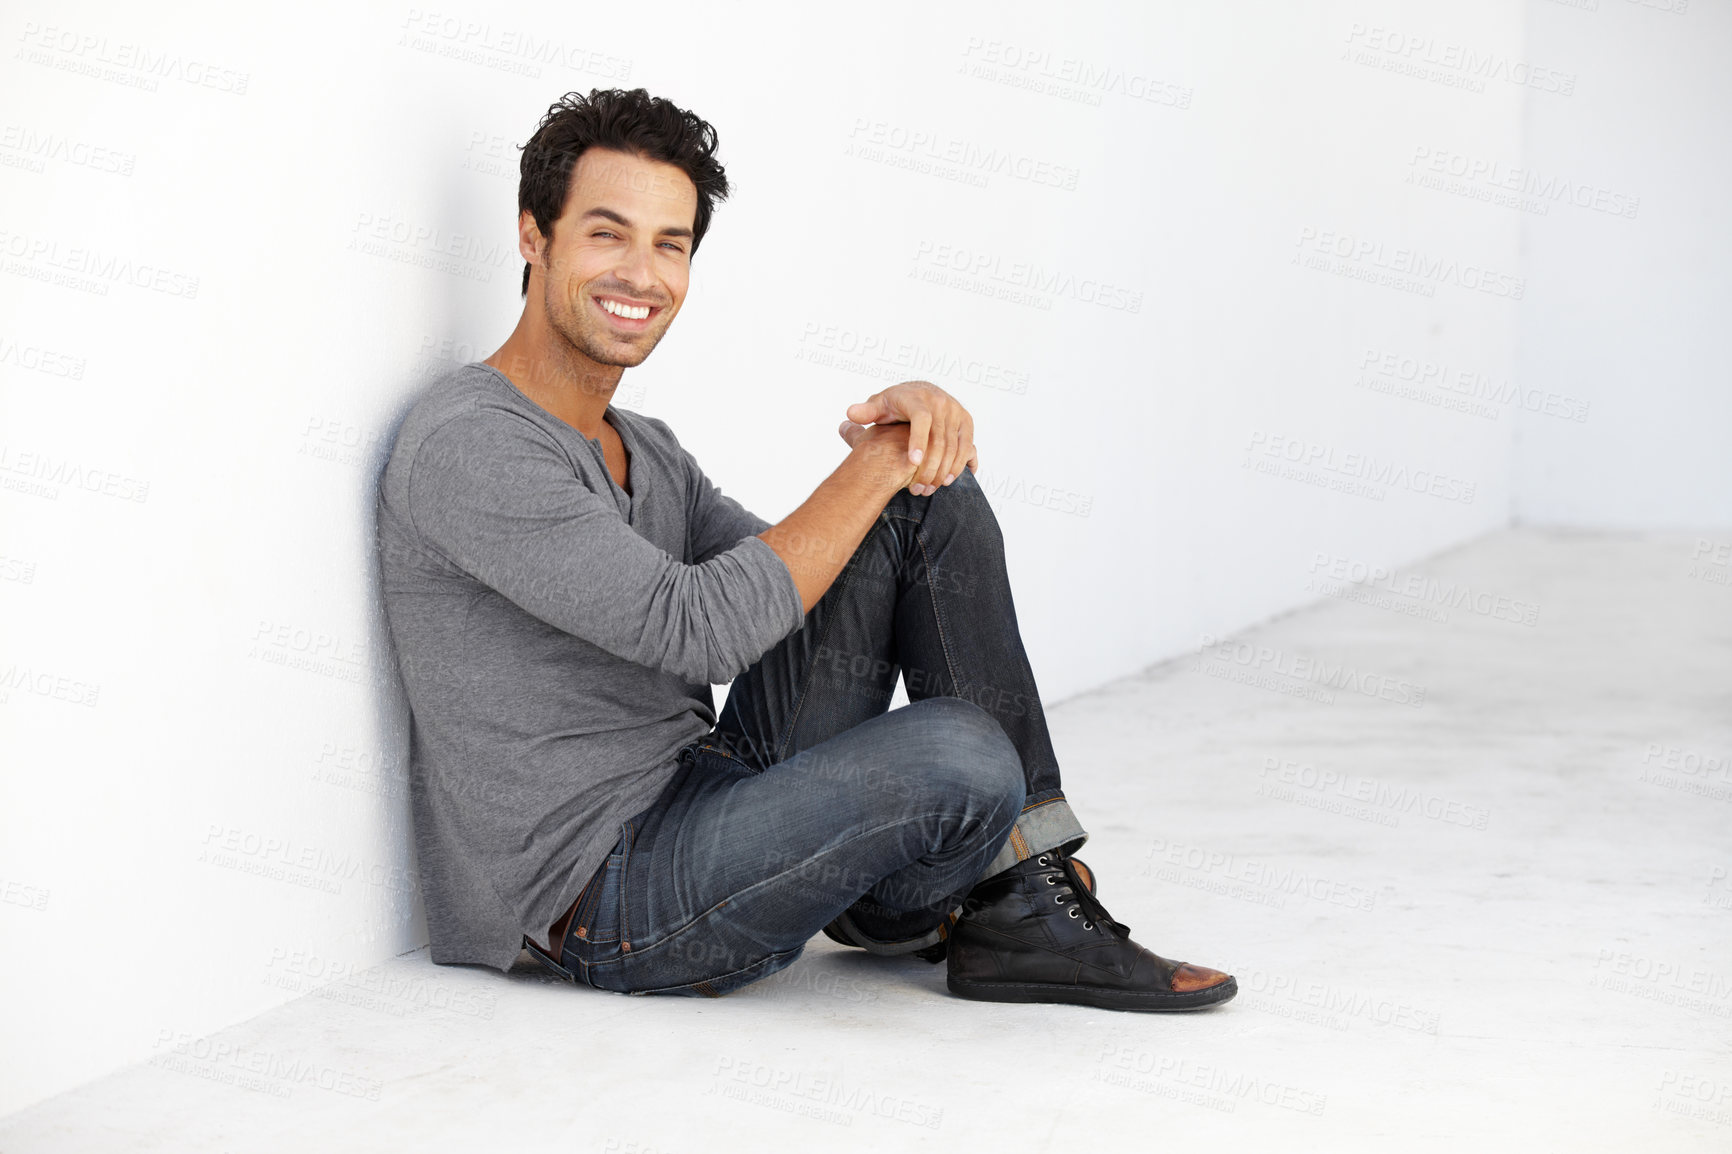 Buy stock photo Smile, fashion and portrait of young man by a white wall in empty room with casual, cool and trendy outfit. Happy, confidence and handsome male model from Canada sitting on floor with edgy style.